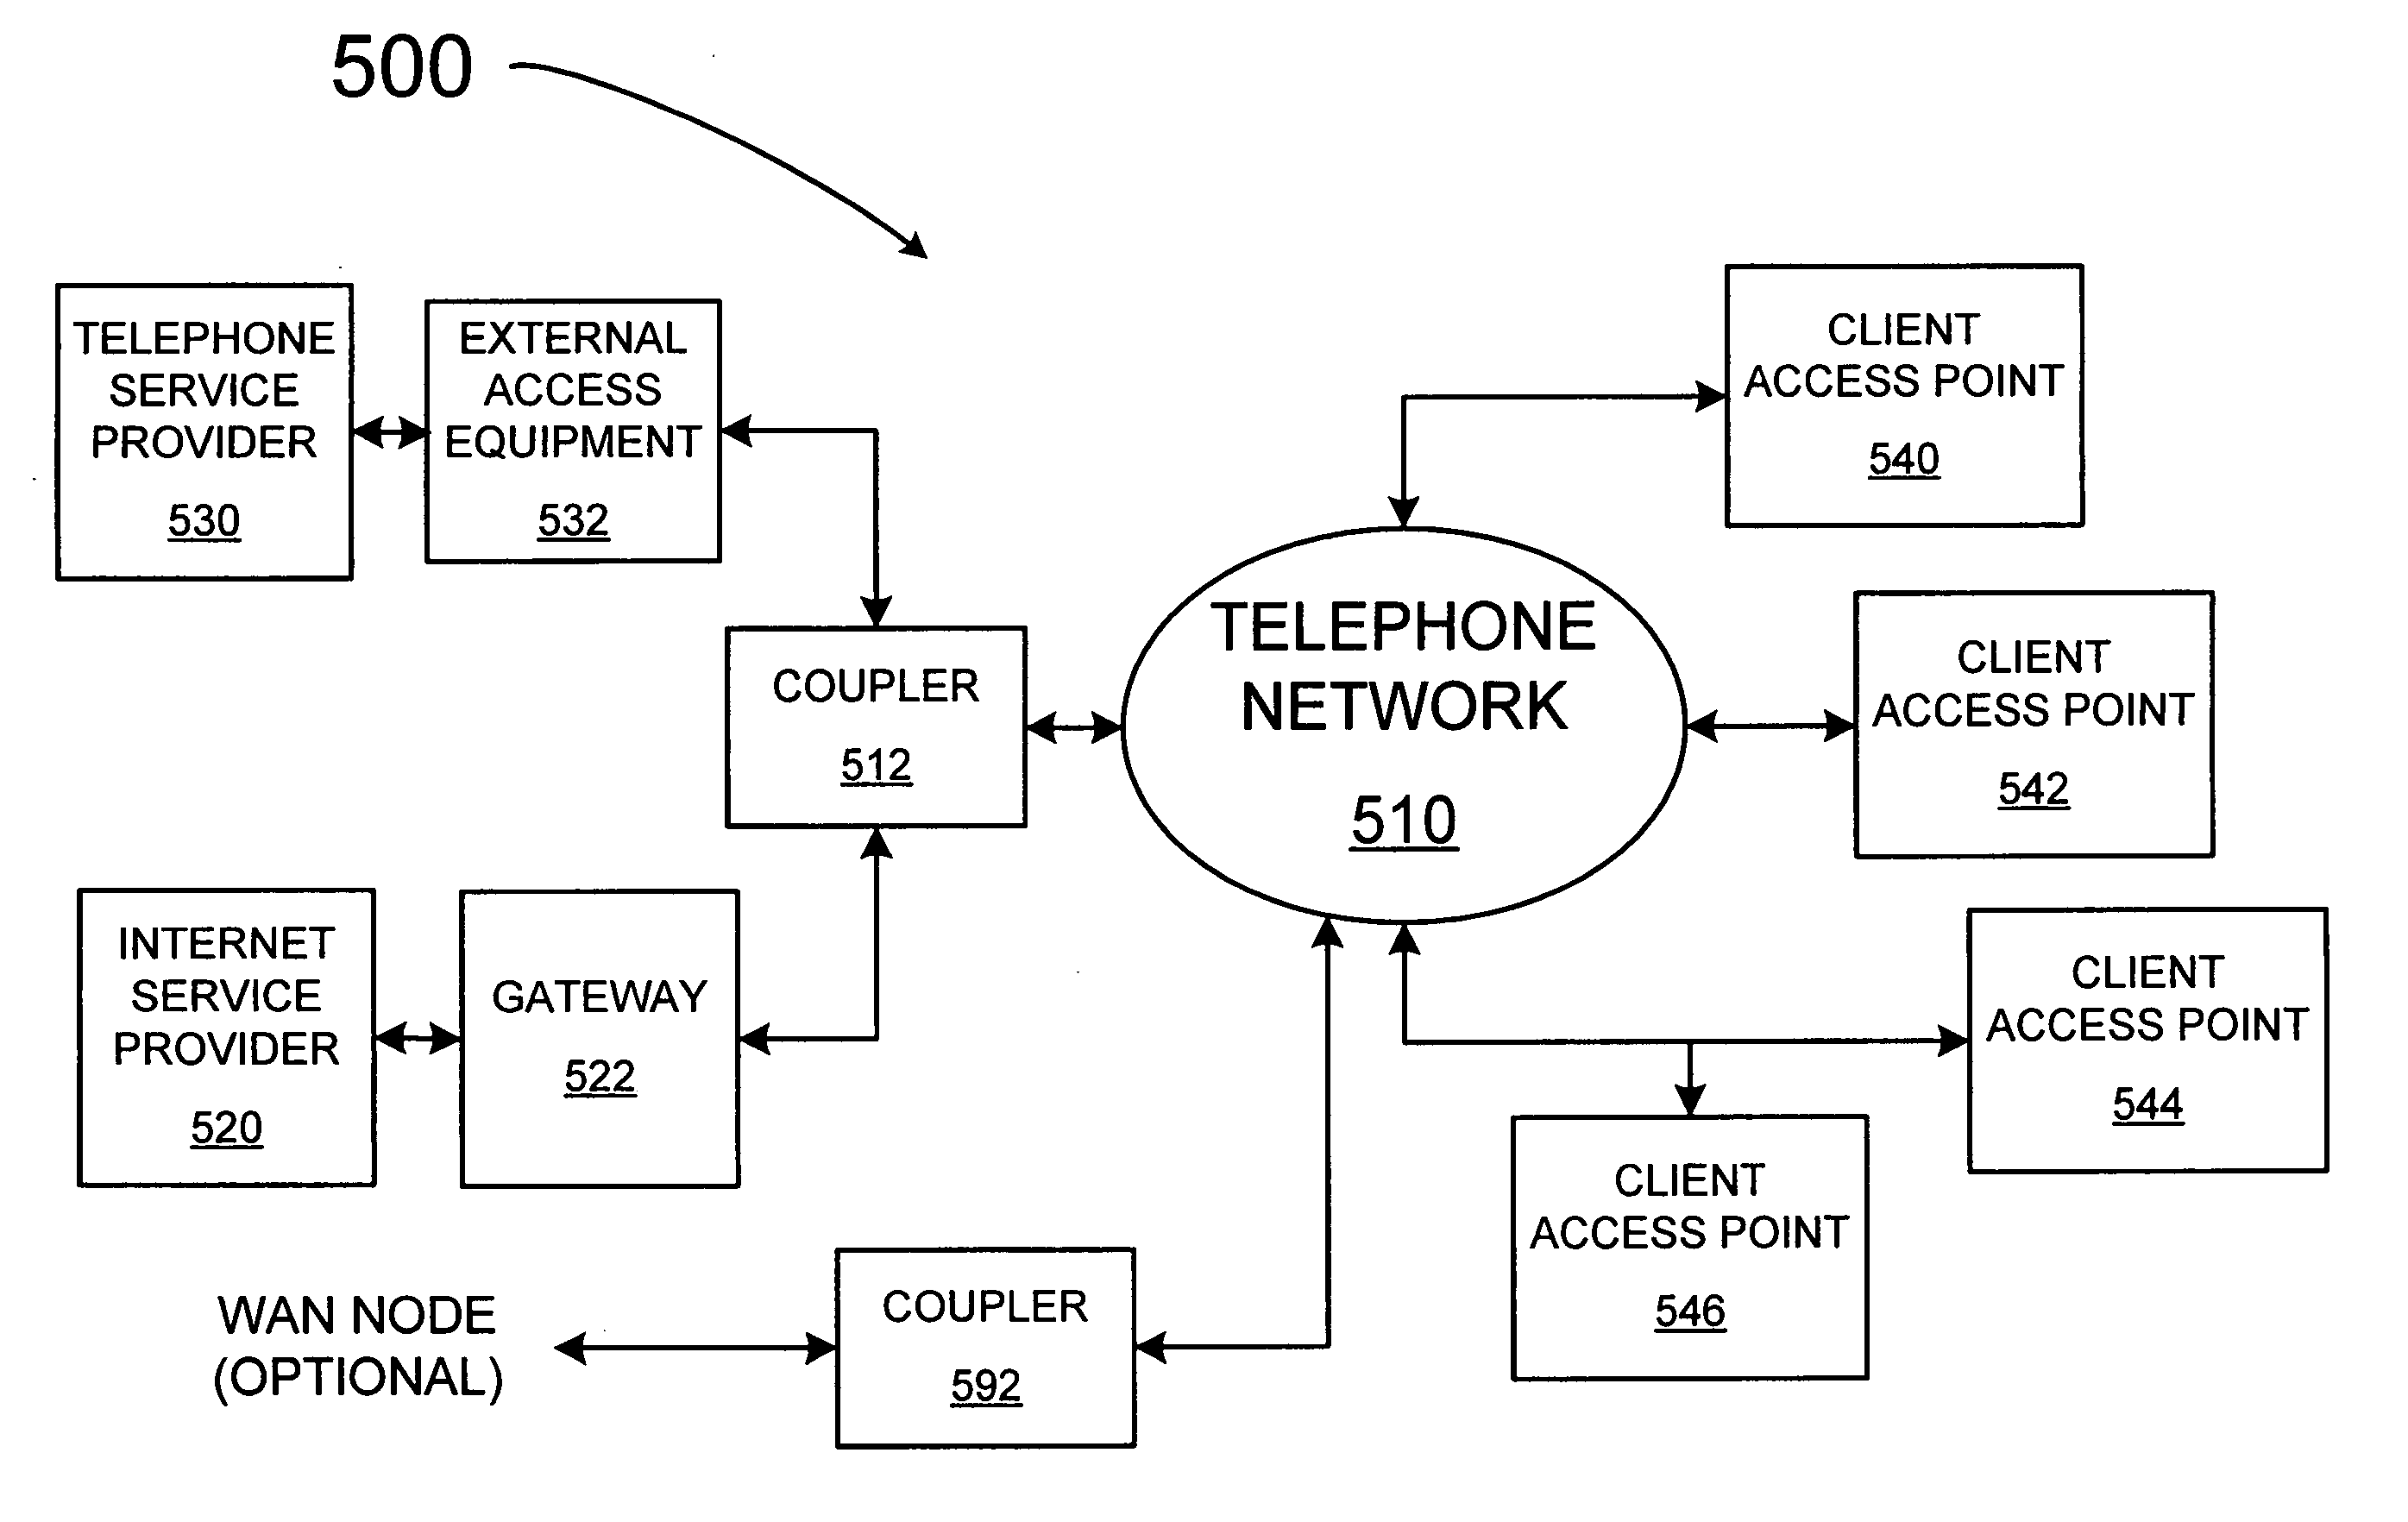 Local area network above telephony infrastructure